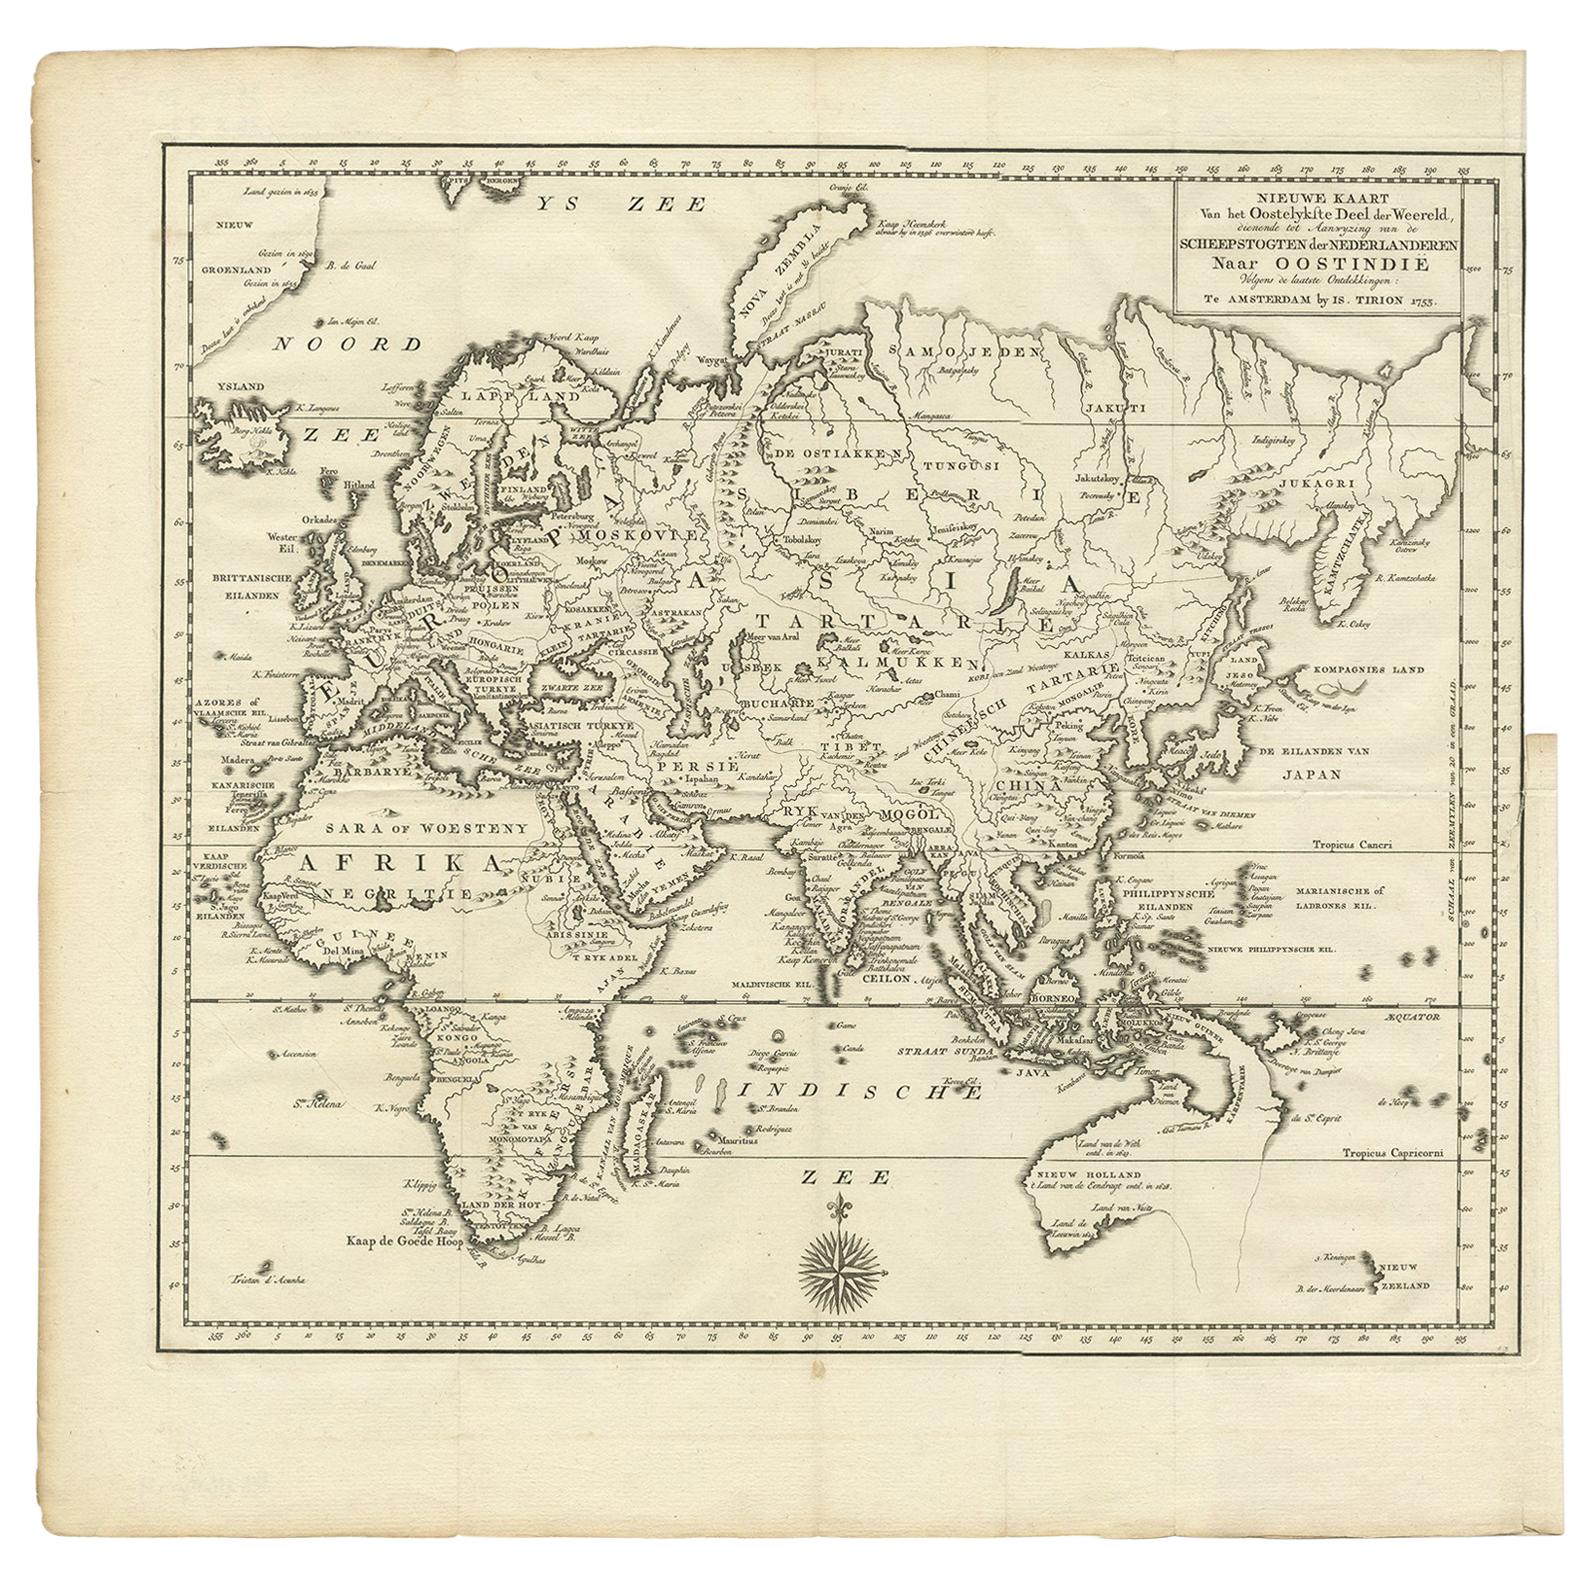 Antique Map of the Eastern Part of the World by Tirion, 1755